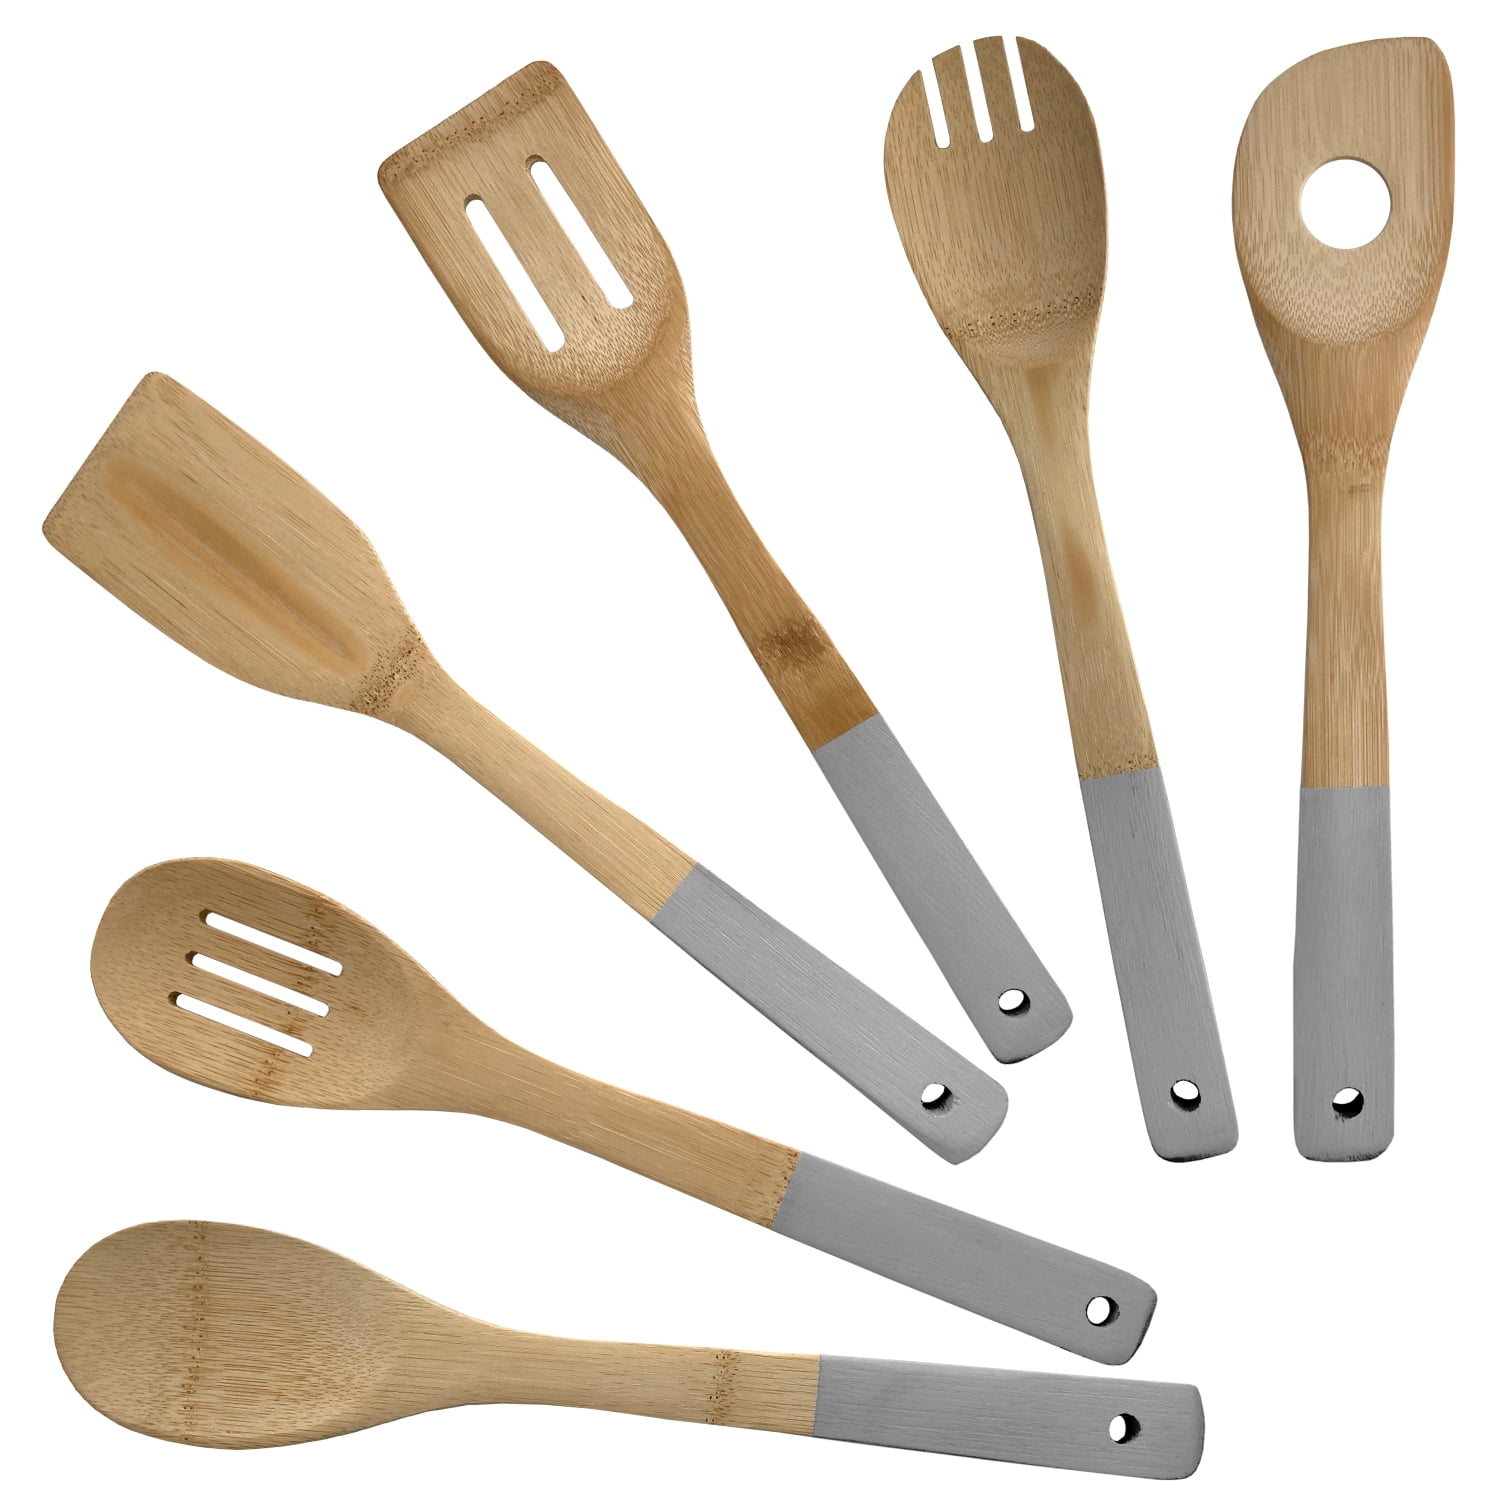 Hastings Home Kitchen Utensil and Gadget Set - 6 Piece Spatula and